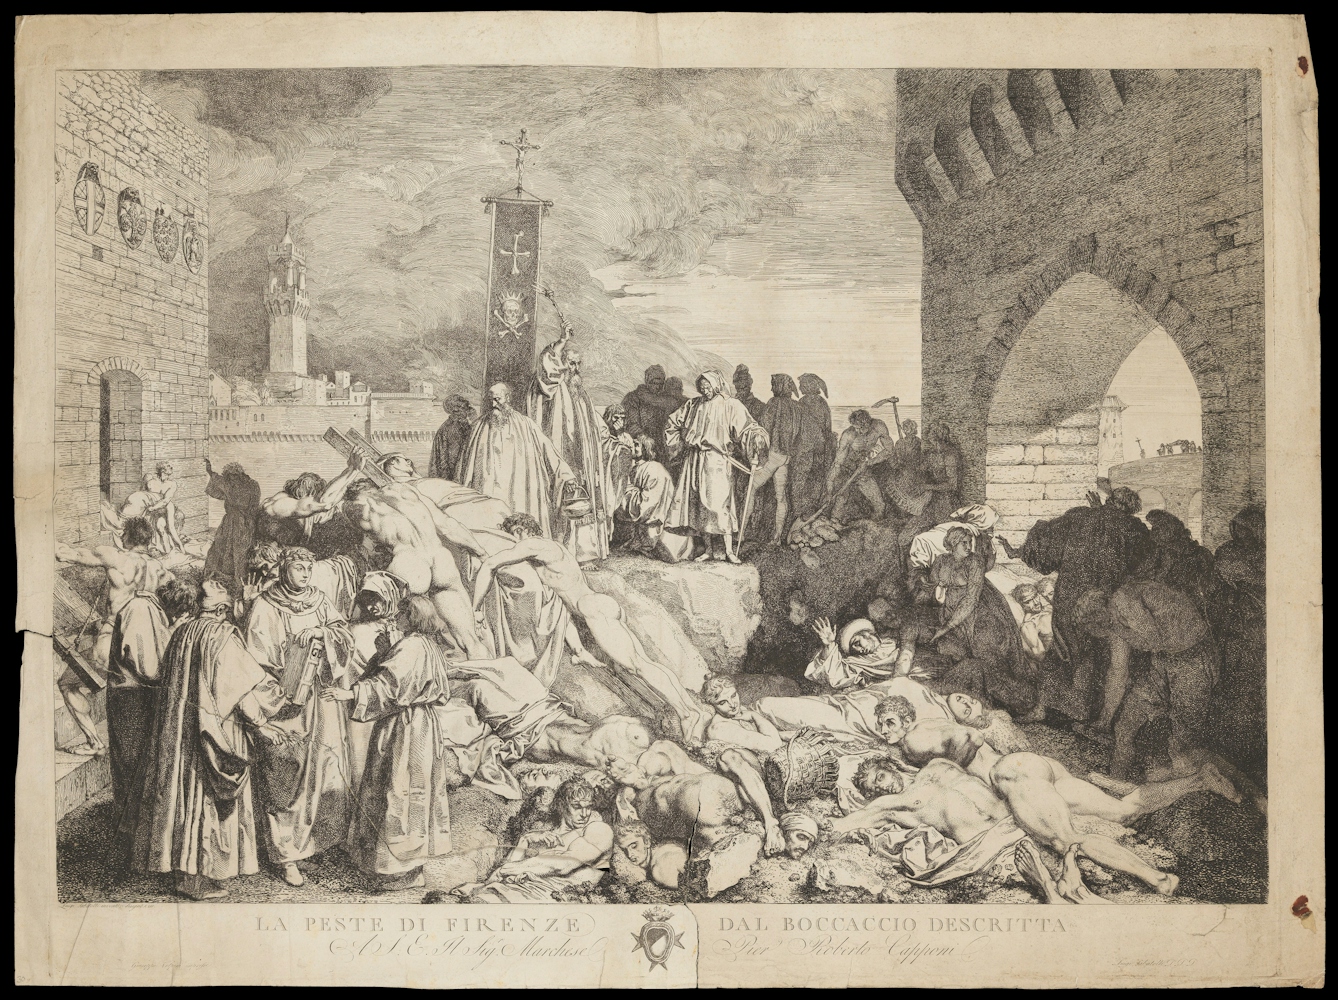 Black and white etching showing a large pile of bodies being dragged into a pit. People who appear from their robes to be monks perform rites or anxiously grasp bibles.